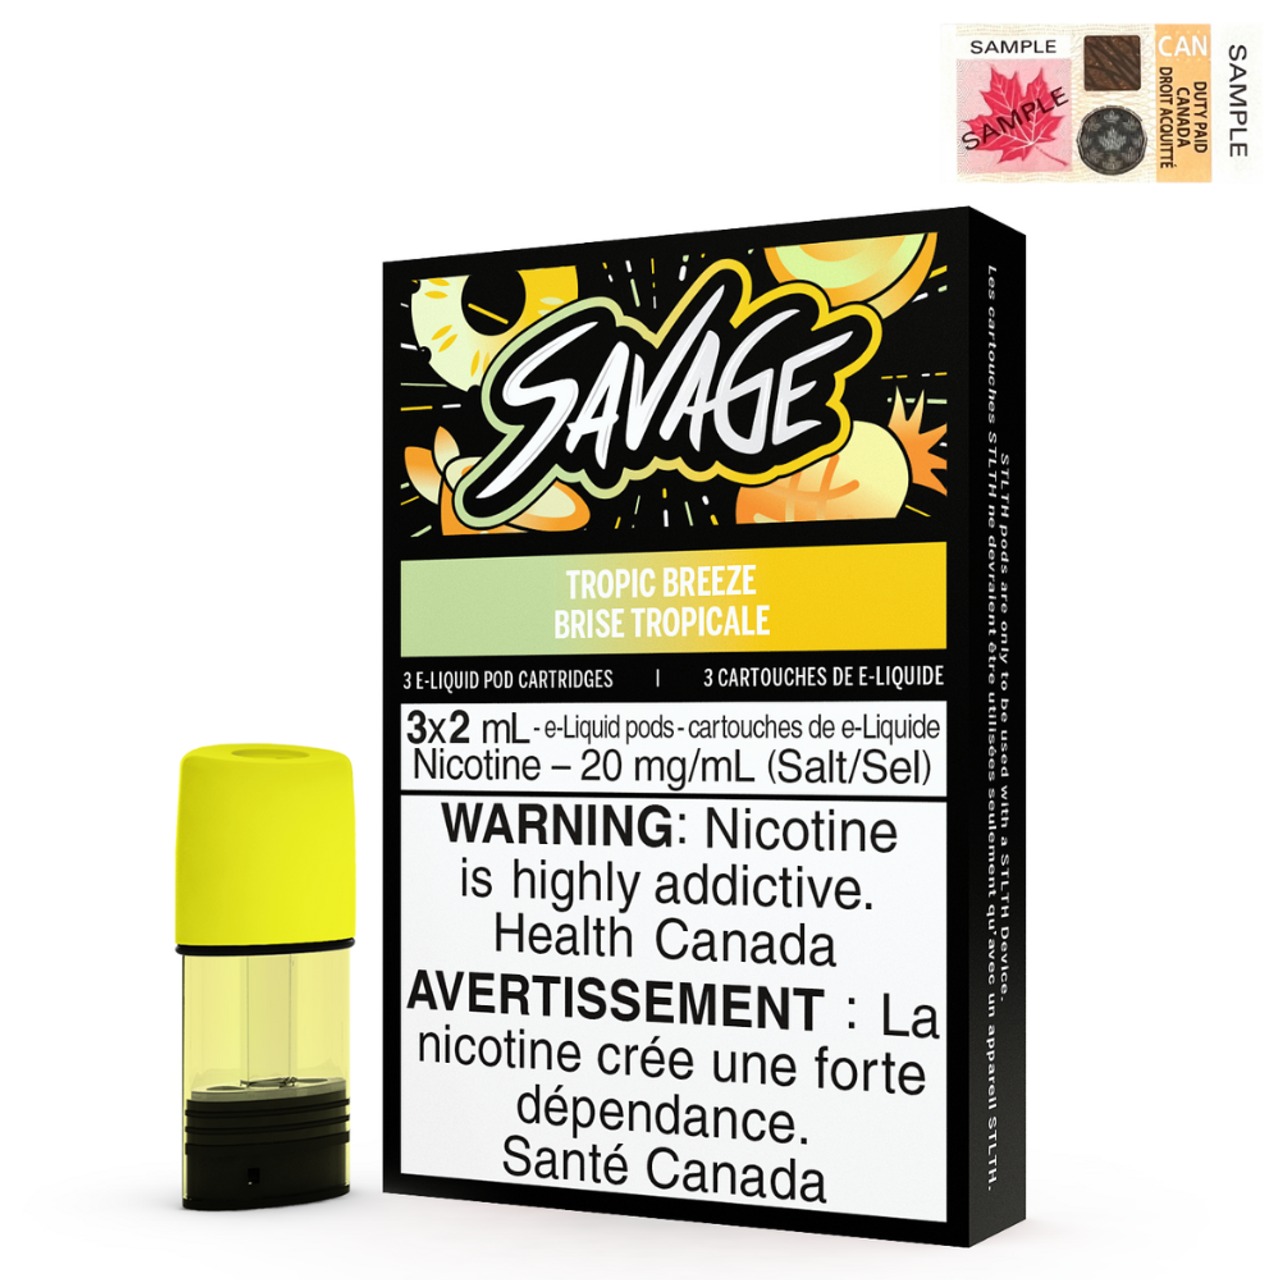 Tropic Breeze (Stamped) STLTH Savage Pods Pack of 3 - B.C. Compliance